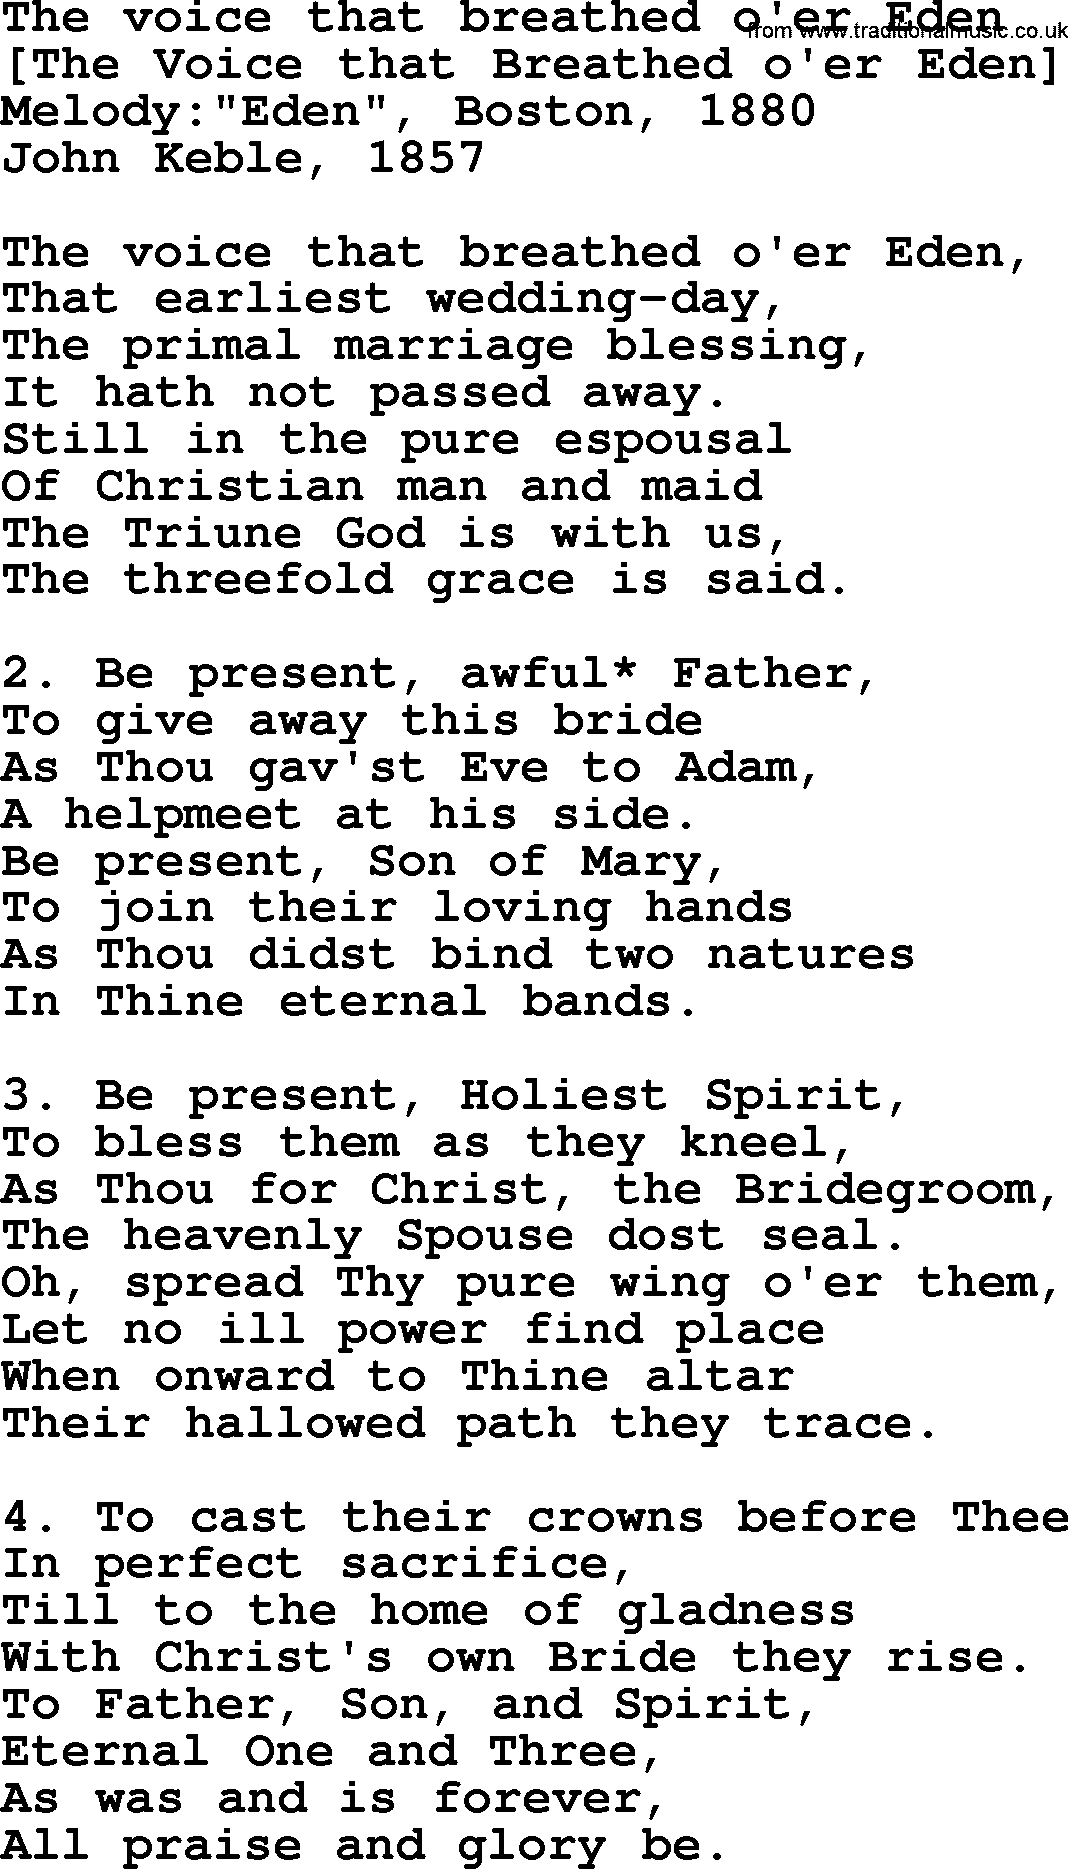 Old English Song: The Voice That Breathed O'er Eden lyrics